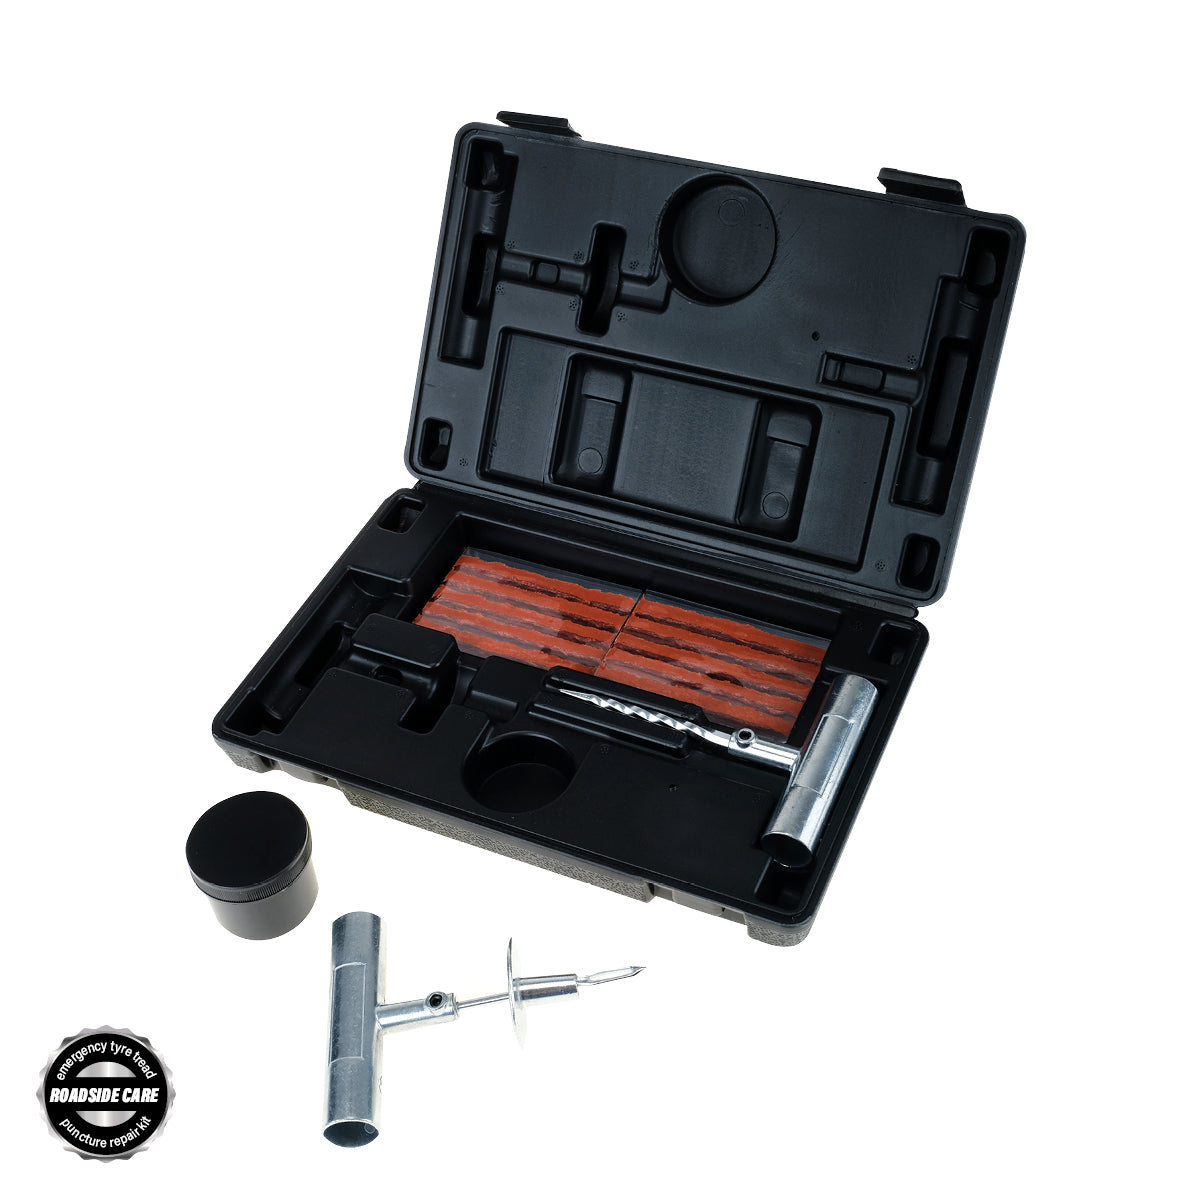 Taipan 25PCE Tyre Puncture Repair Kit With Storage Case Professional Design